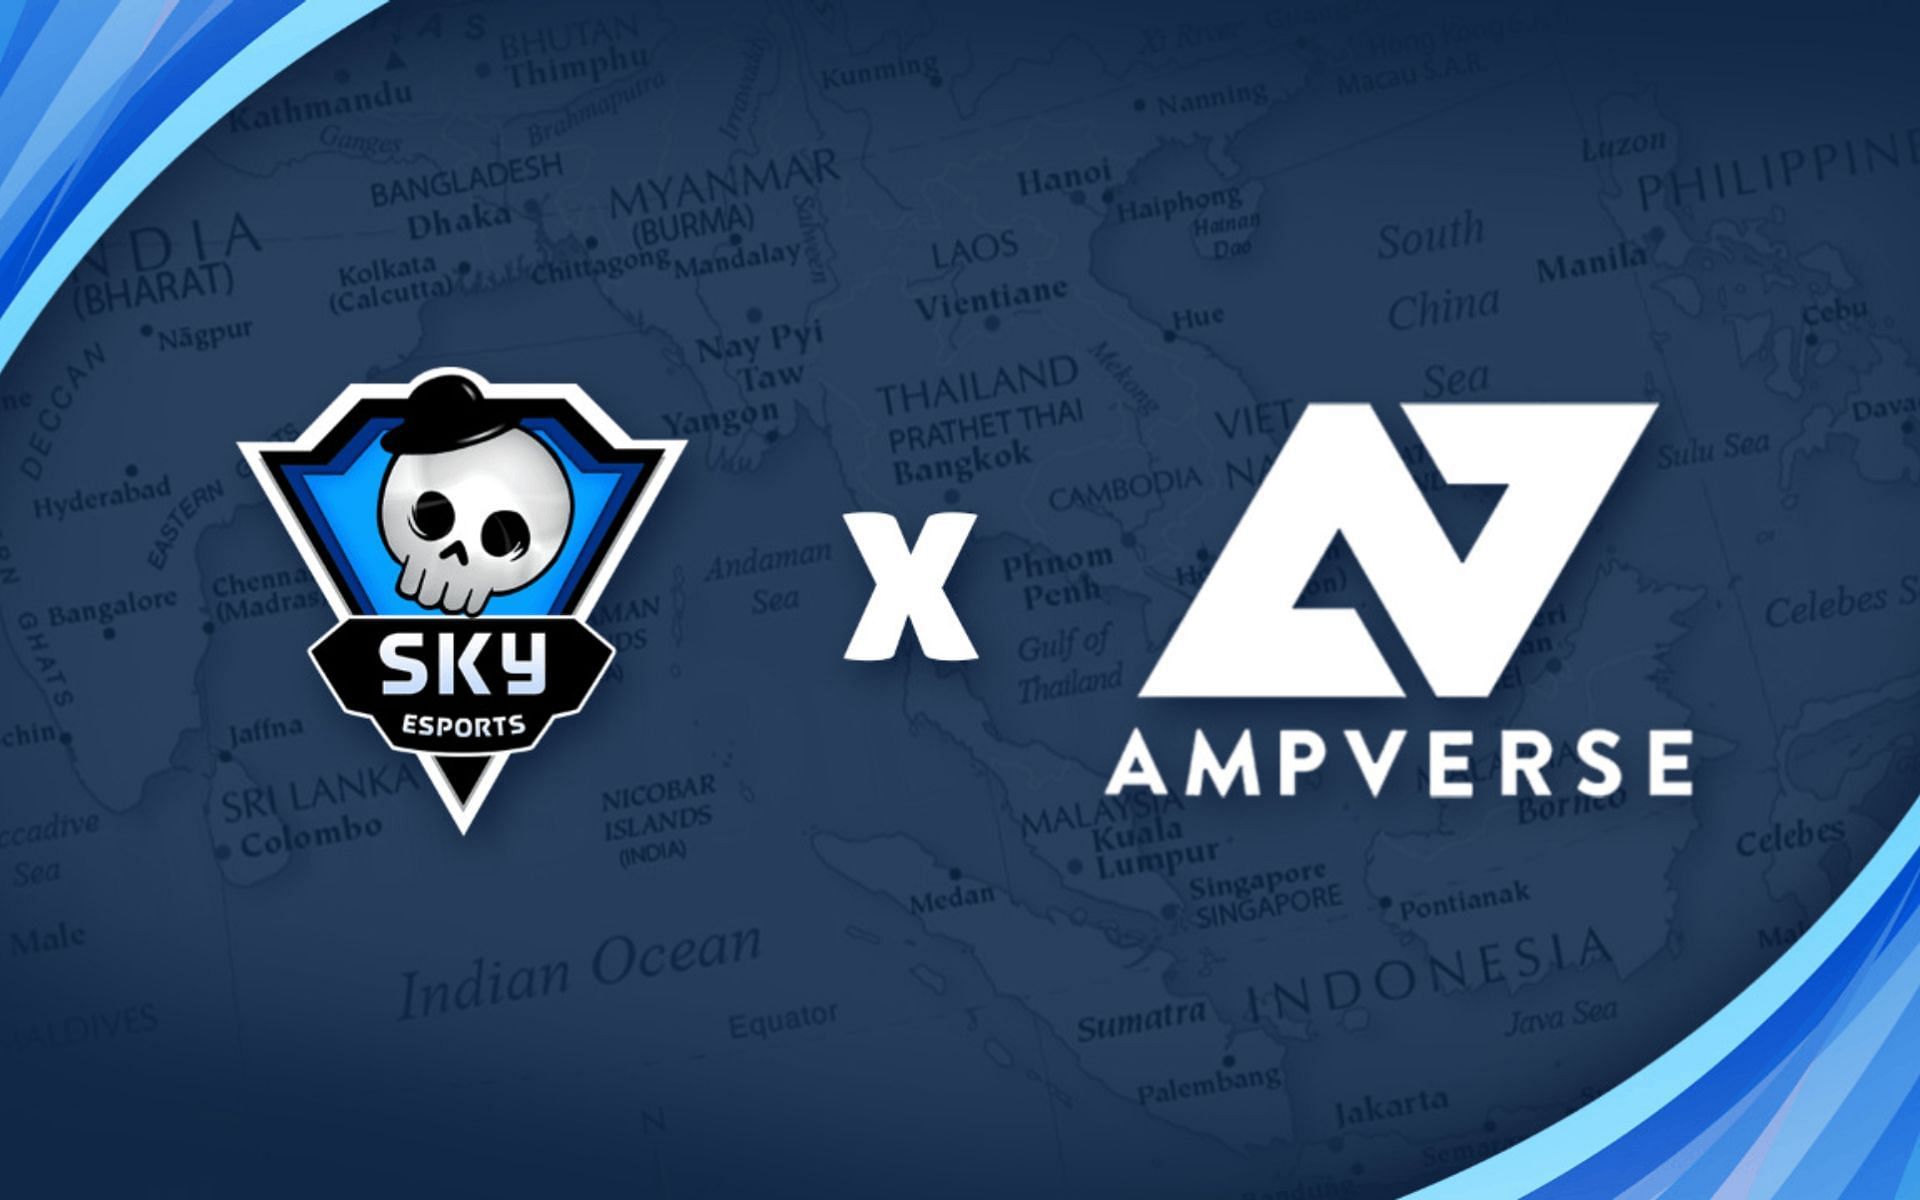 Skyesports announces expansion plan with Ampverse (Image via Skyesports)